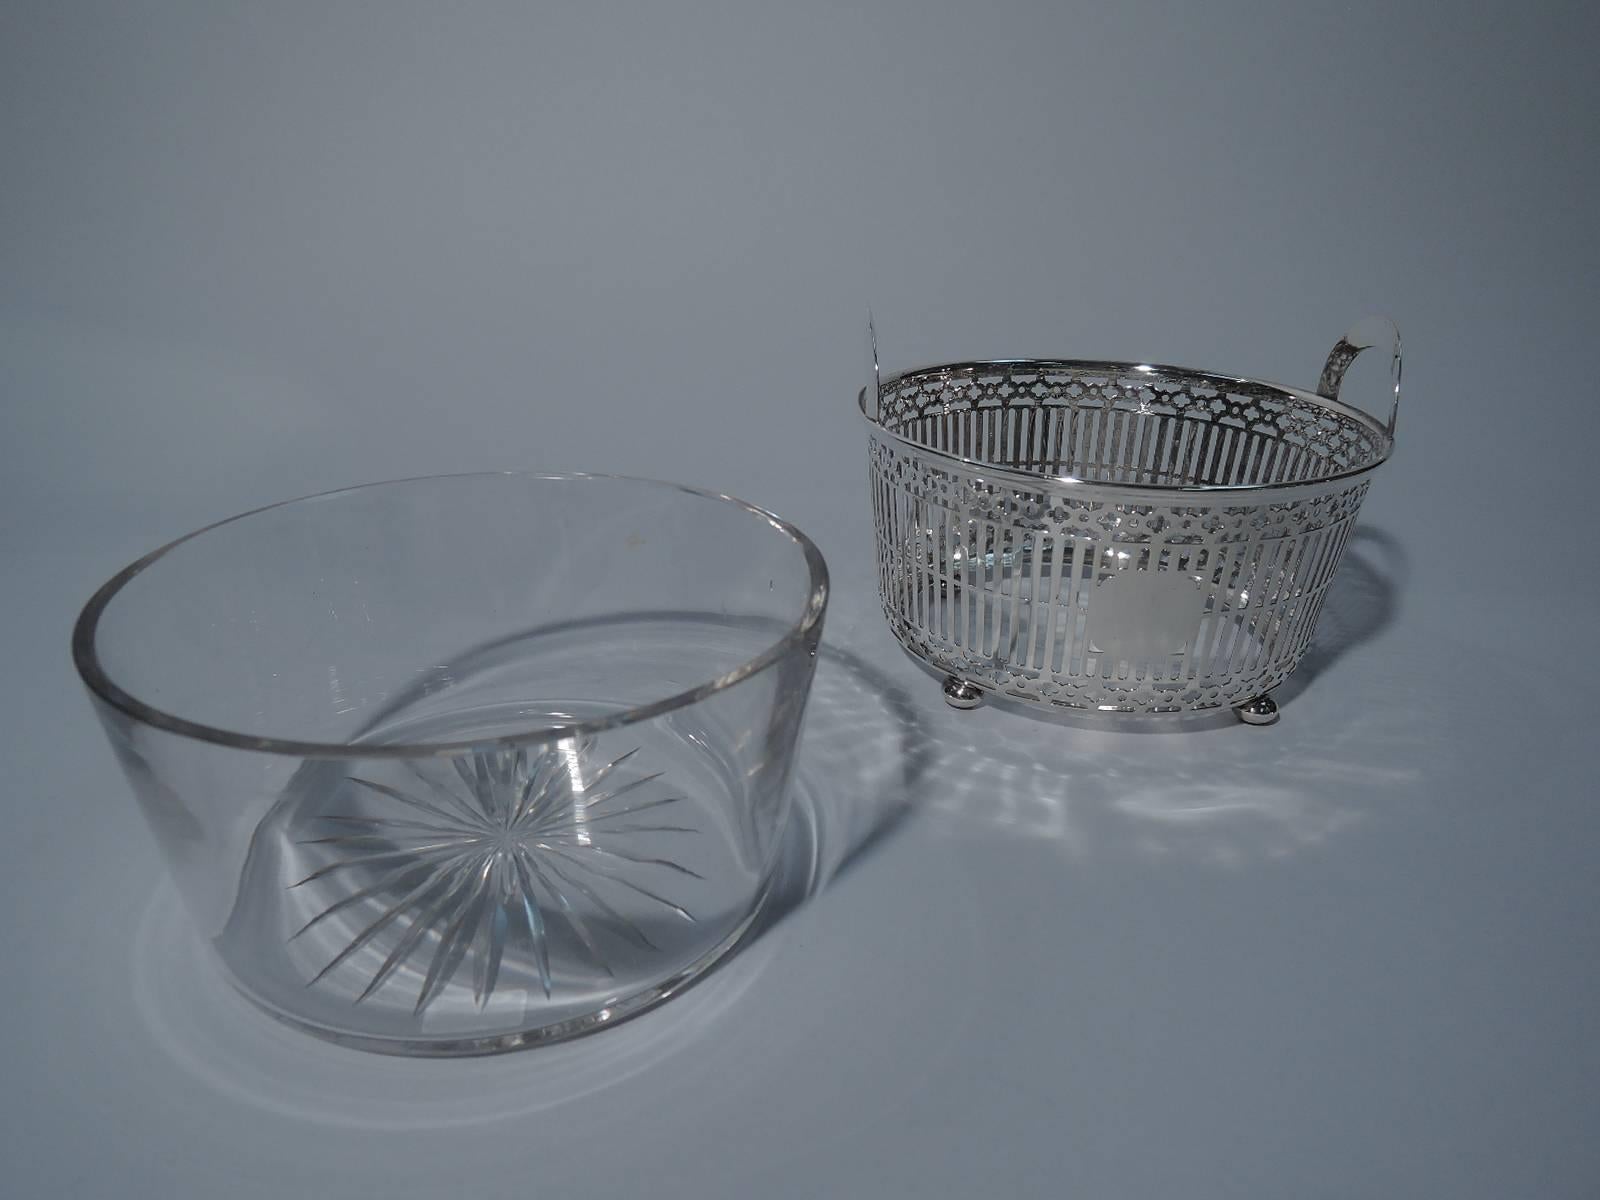 Sterling silver ice bucket. Made by Meriden Britannia (part of International) in Meriden, Conn., circa 1920. Basket-form with geometric piercing and arched handles mounted to rim. Rests on 4 ball feet. Clear glass liner. Hallmark includes no. 354.